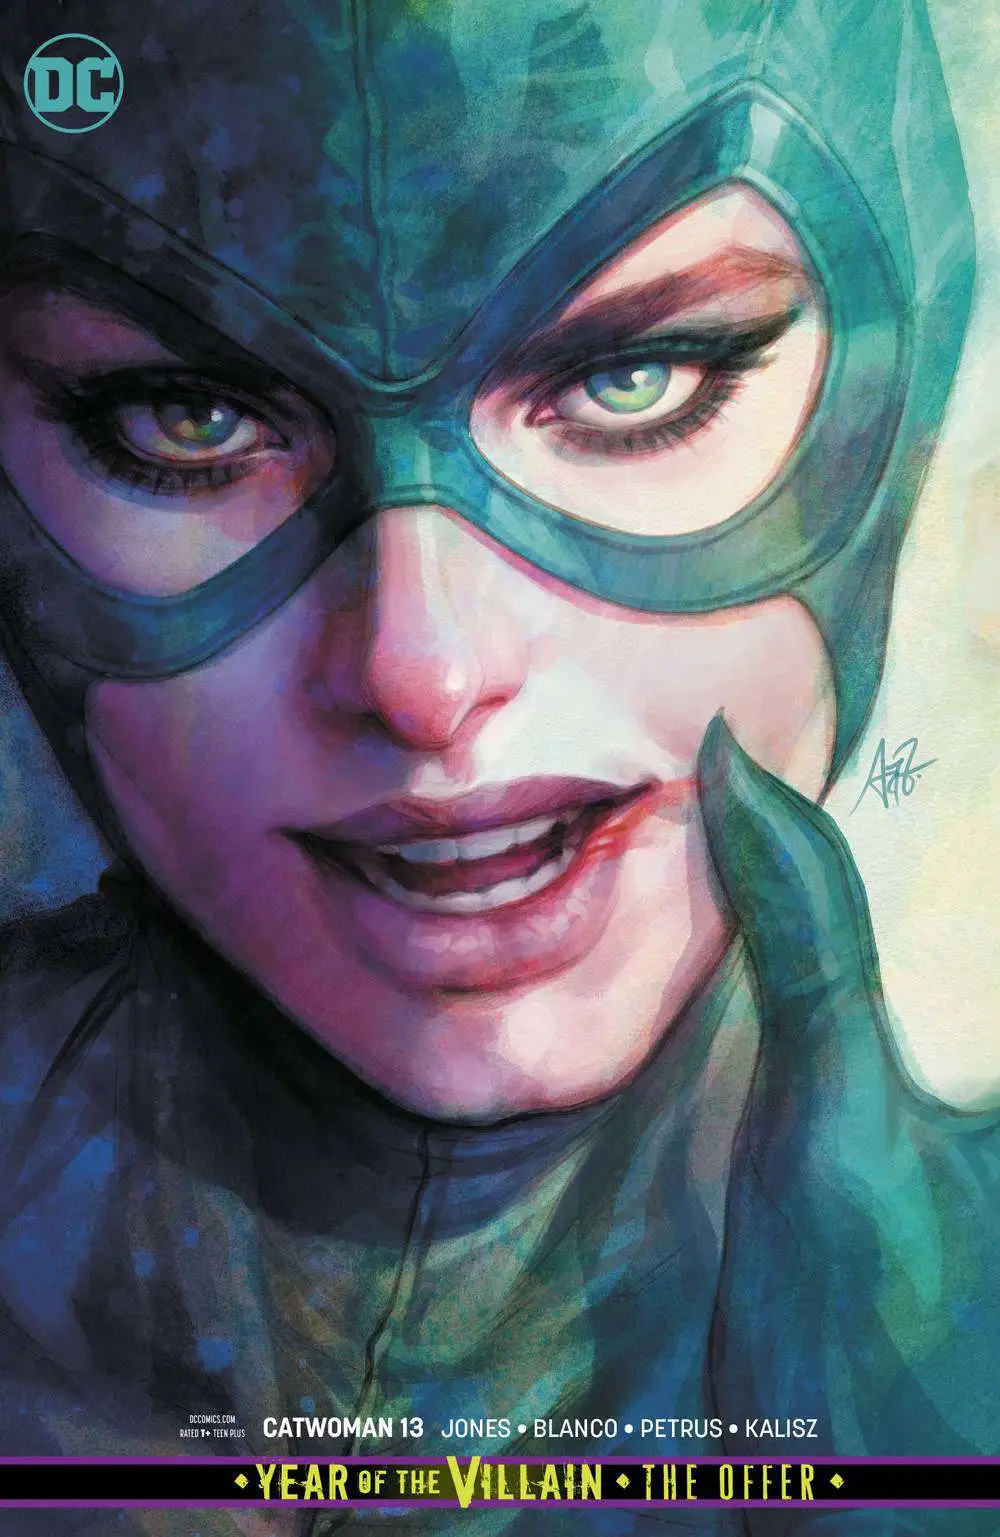 CATWOMAN #15 STANLEY LAU CARD STOCK VARIANT EDITION COVER YOTV DC 2019 